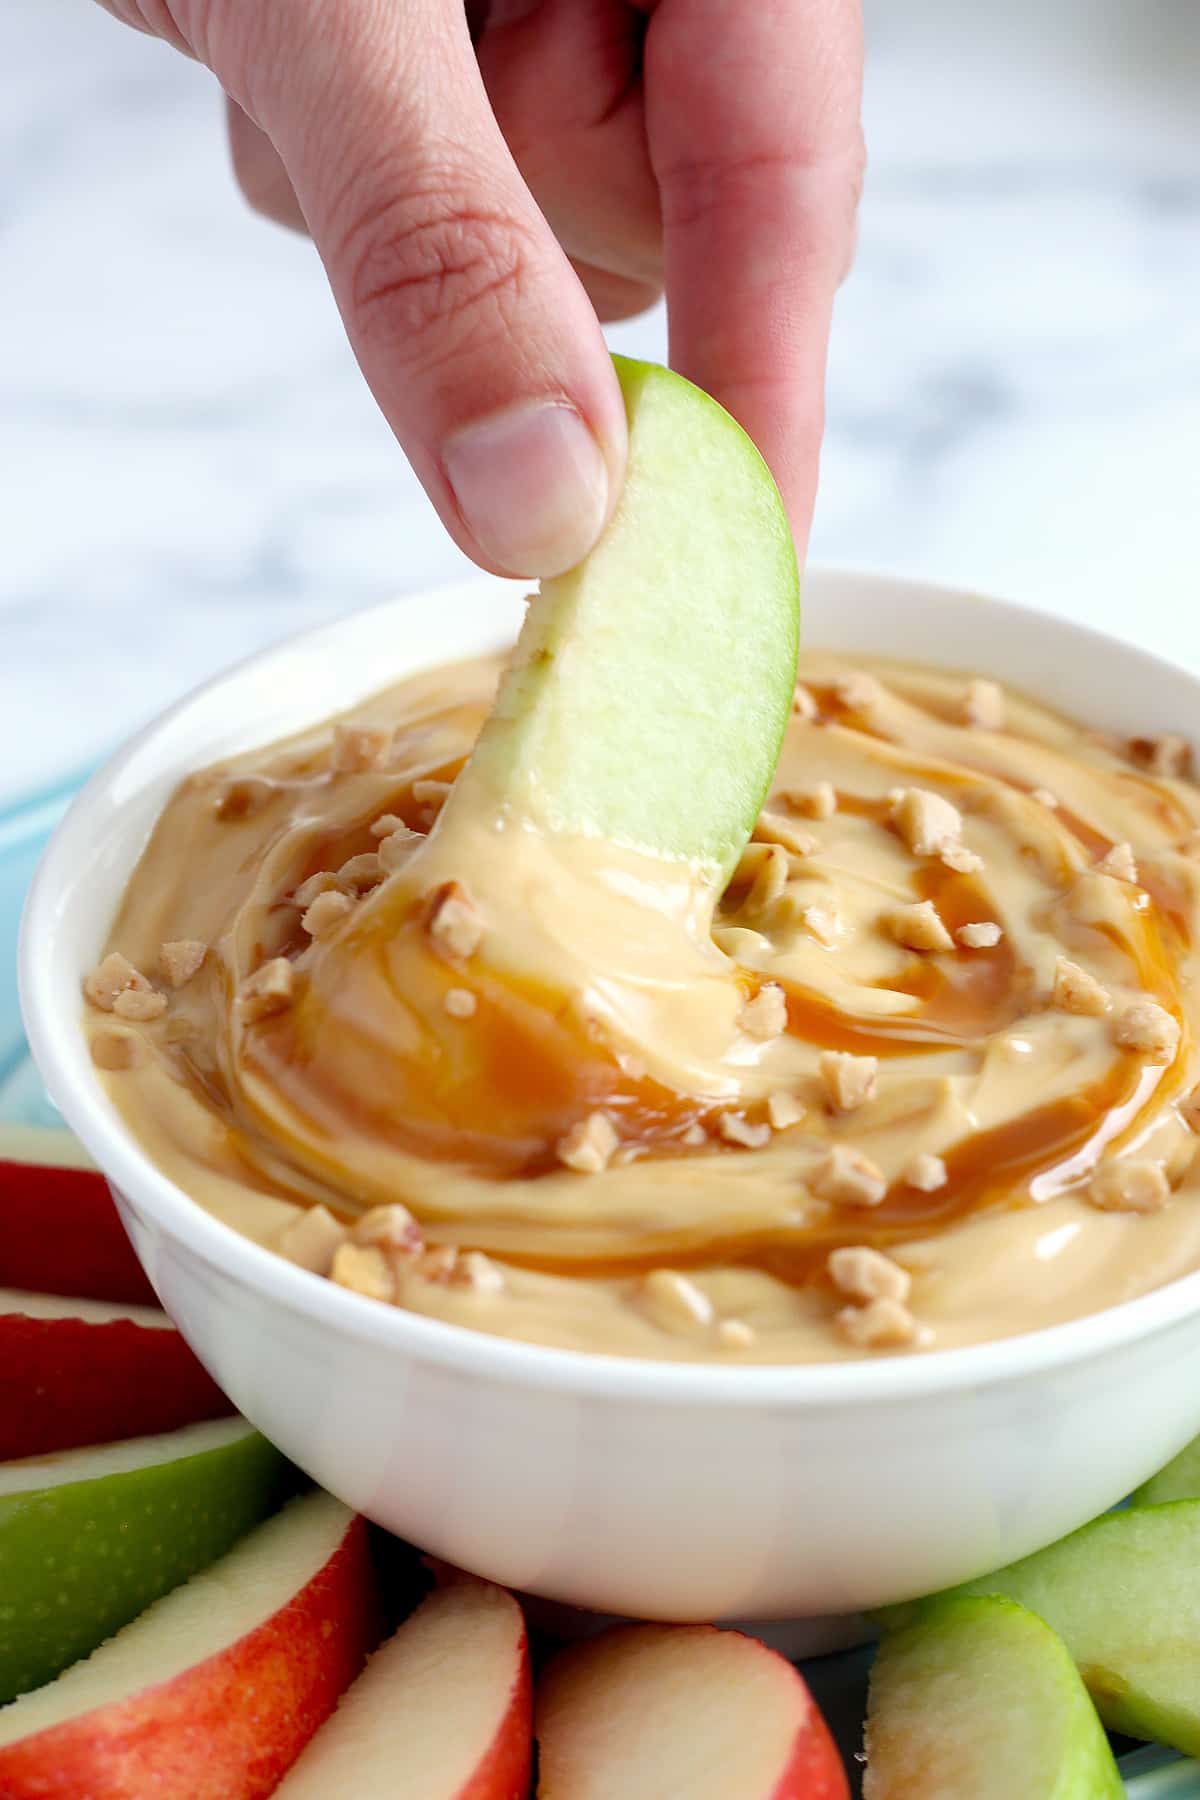 A slice of apple dipped in caramel apple dip with caramel drizzle and toffee bits.